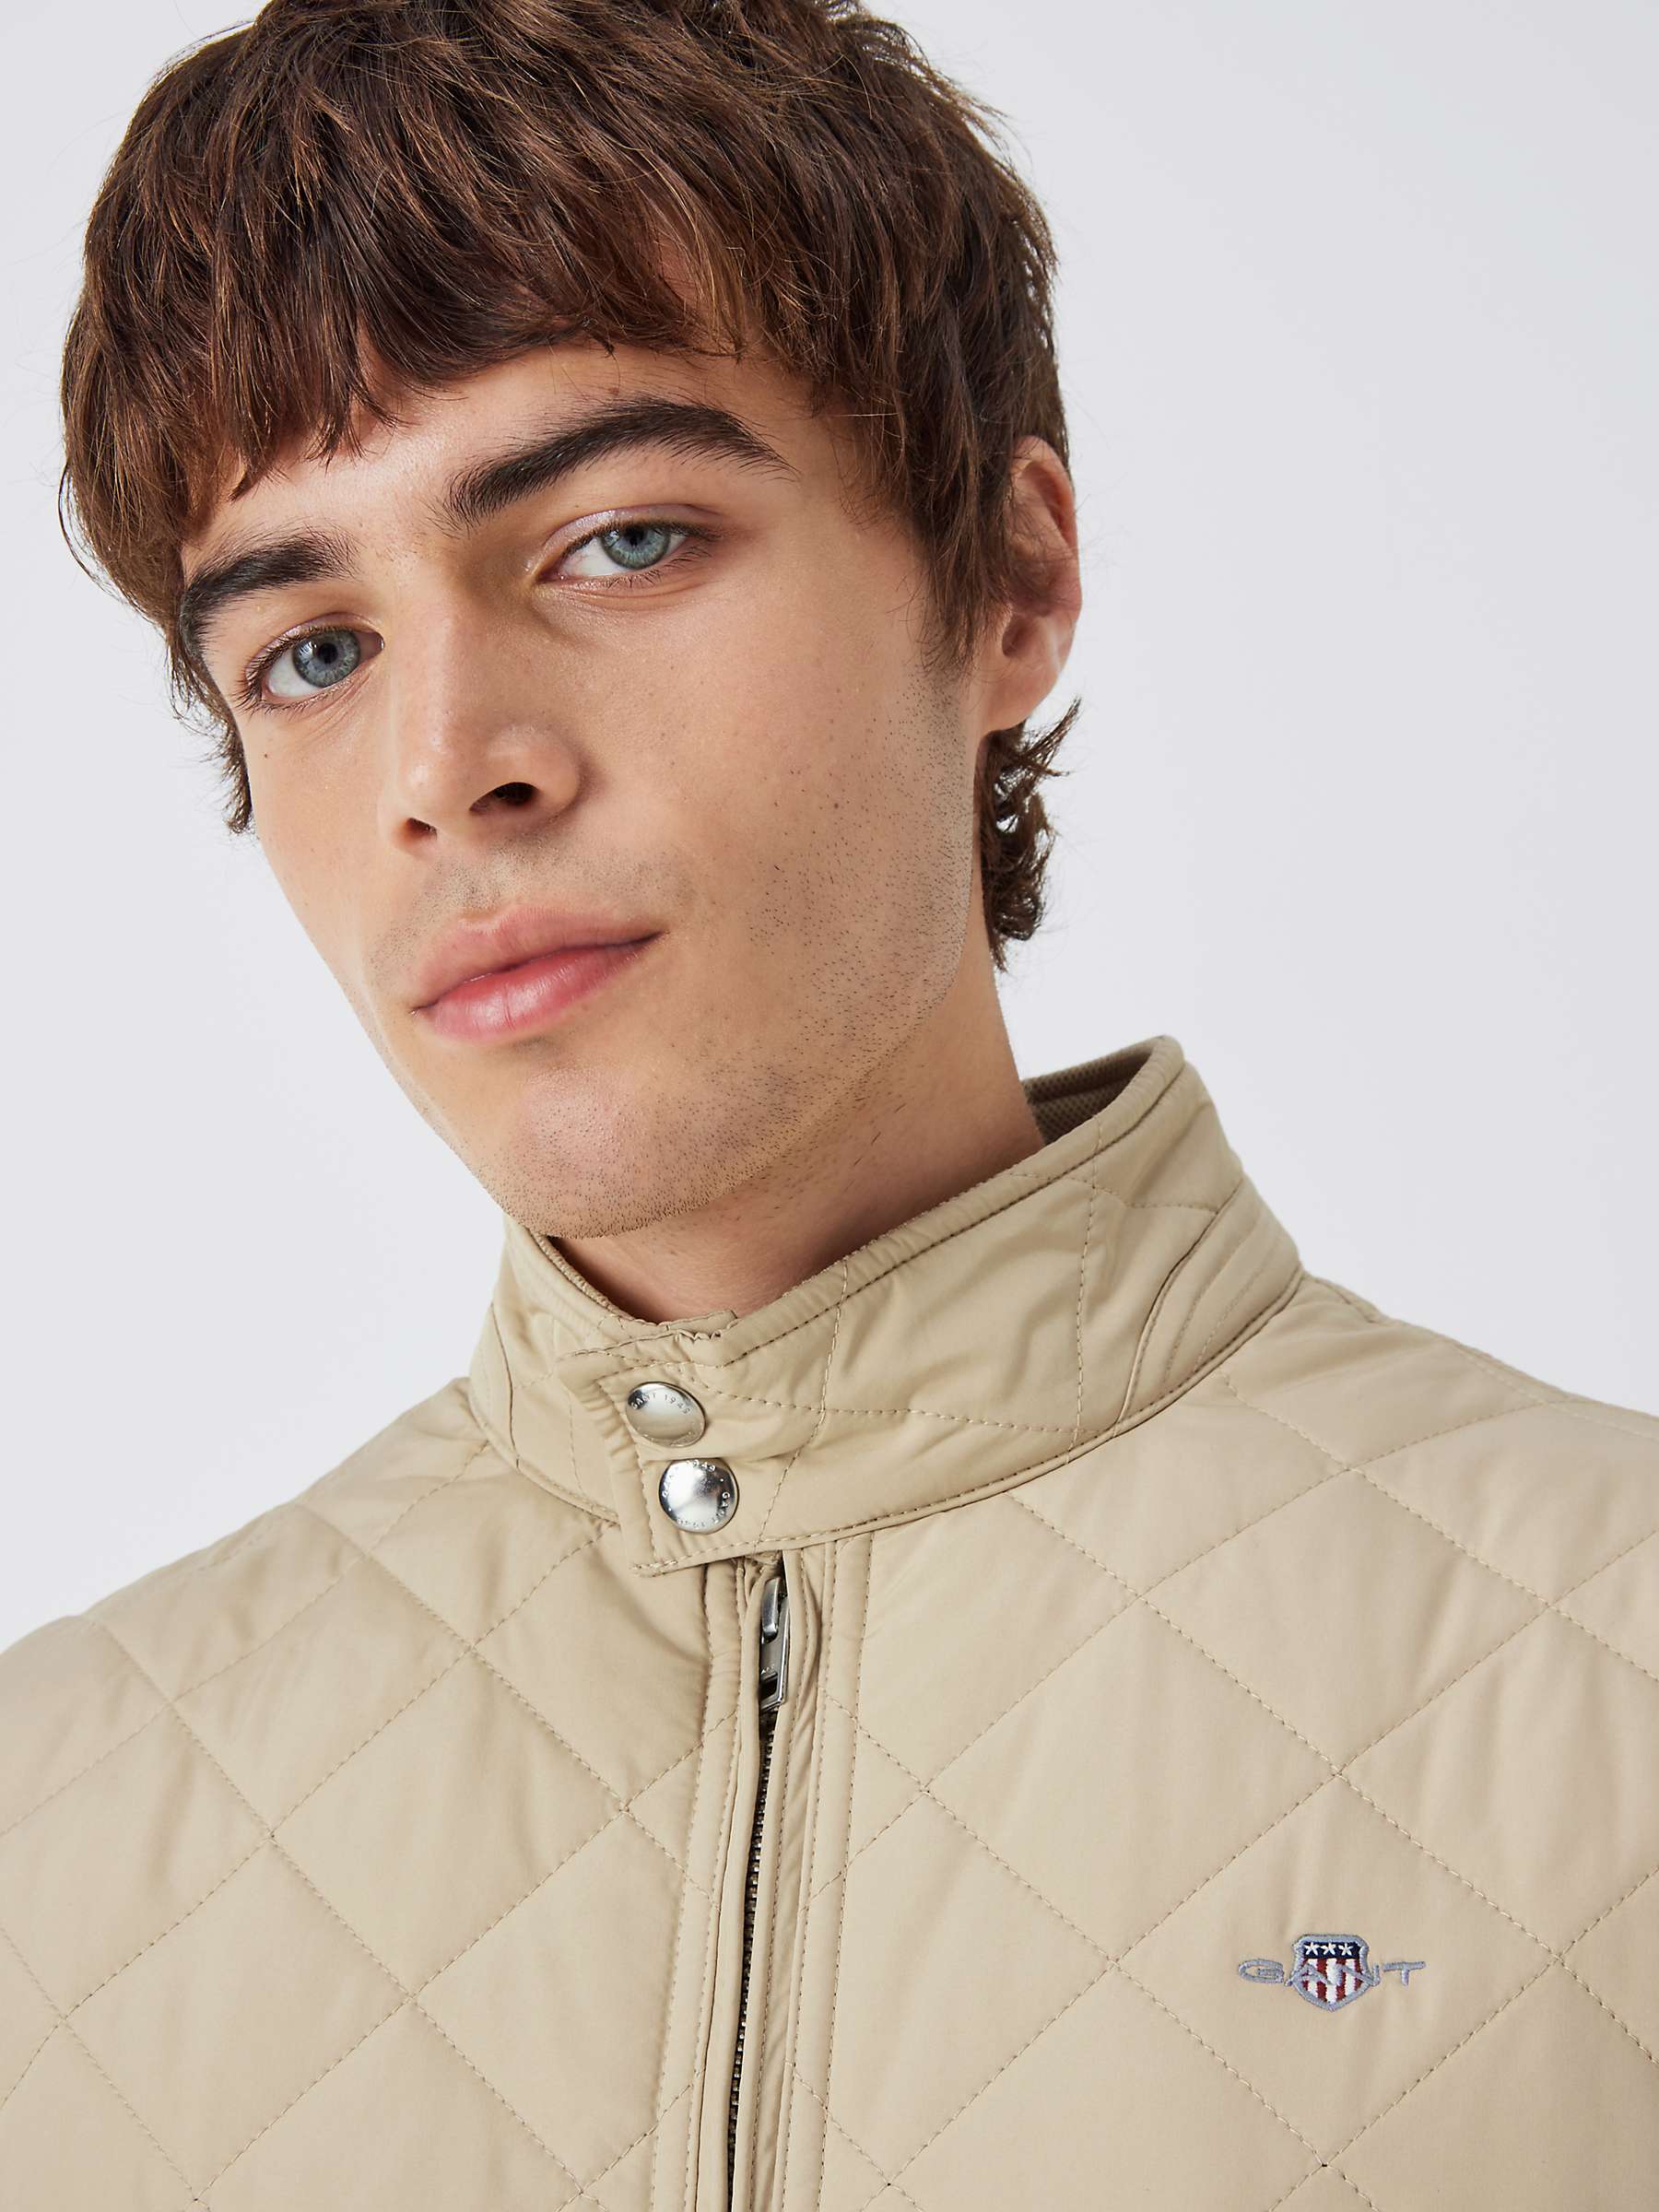 Buy GANT Quilted Windcheater Gilet, Dry Sand Online at johnlewis.com